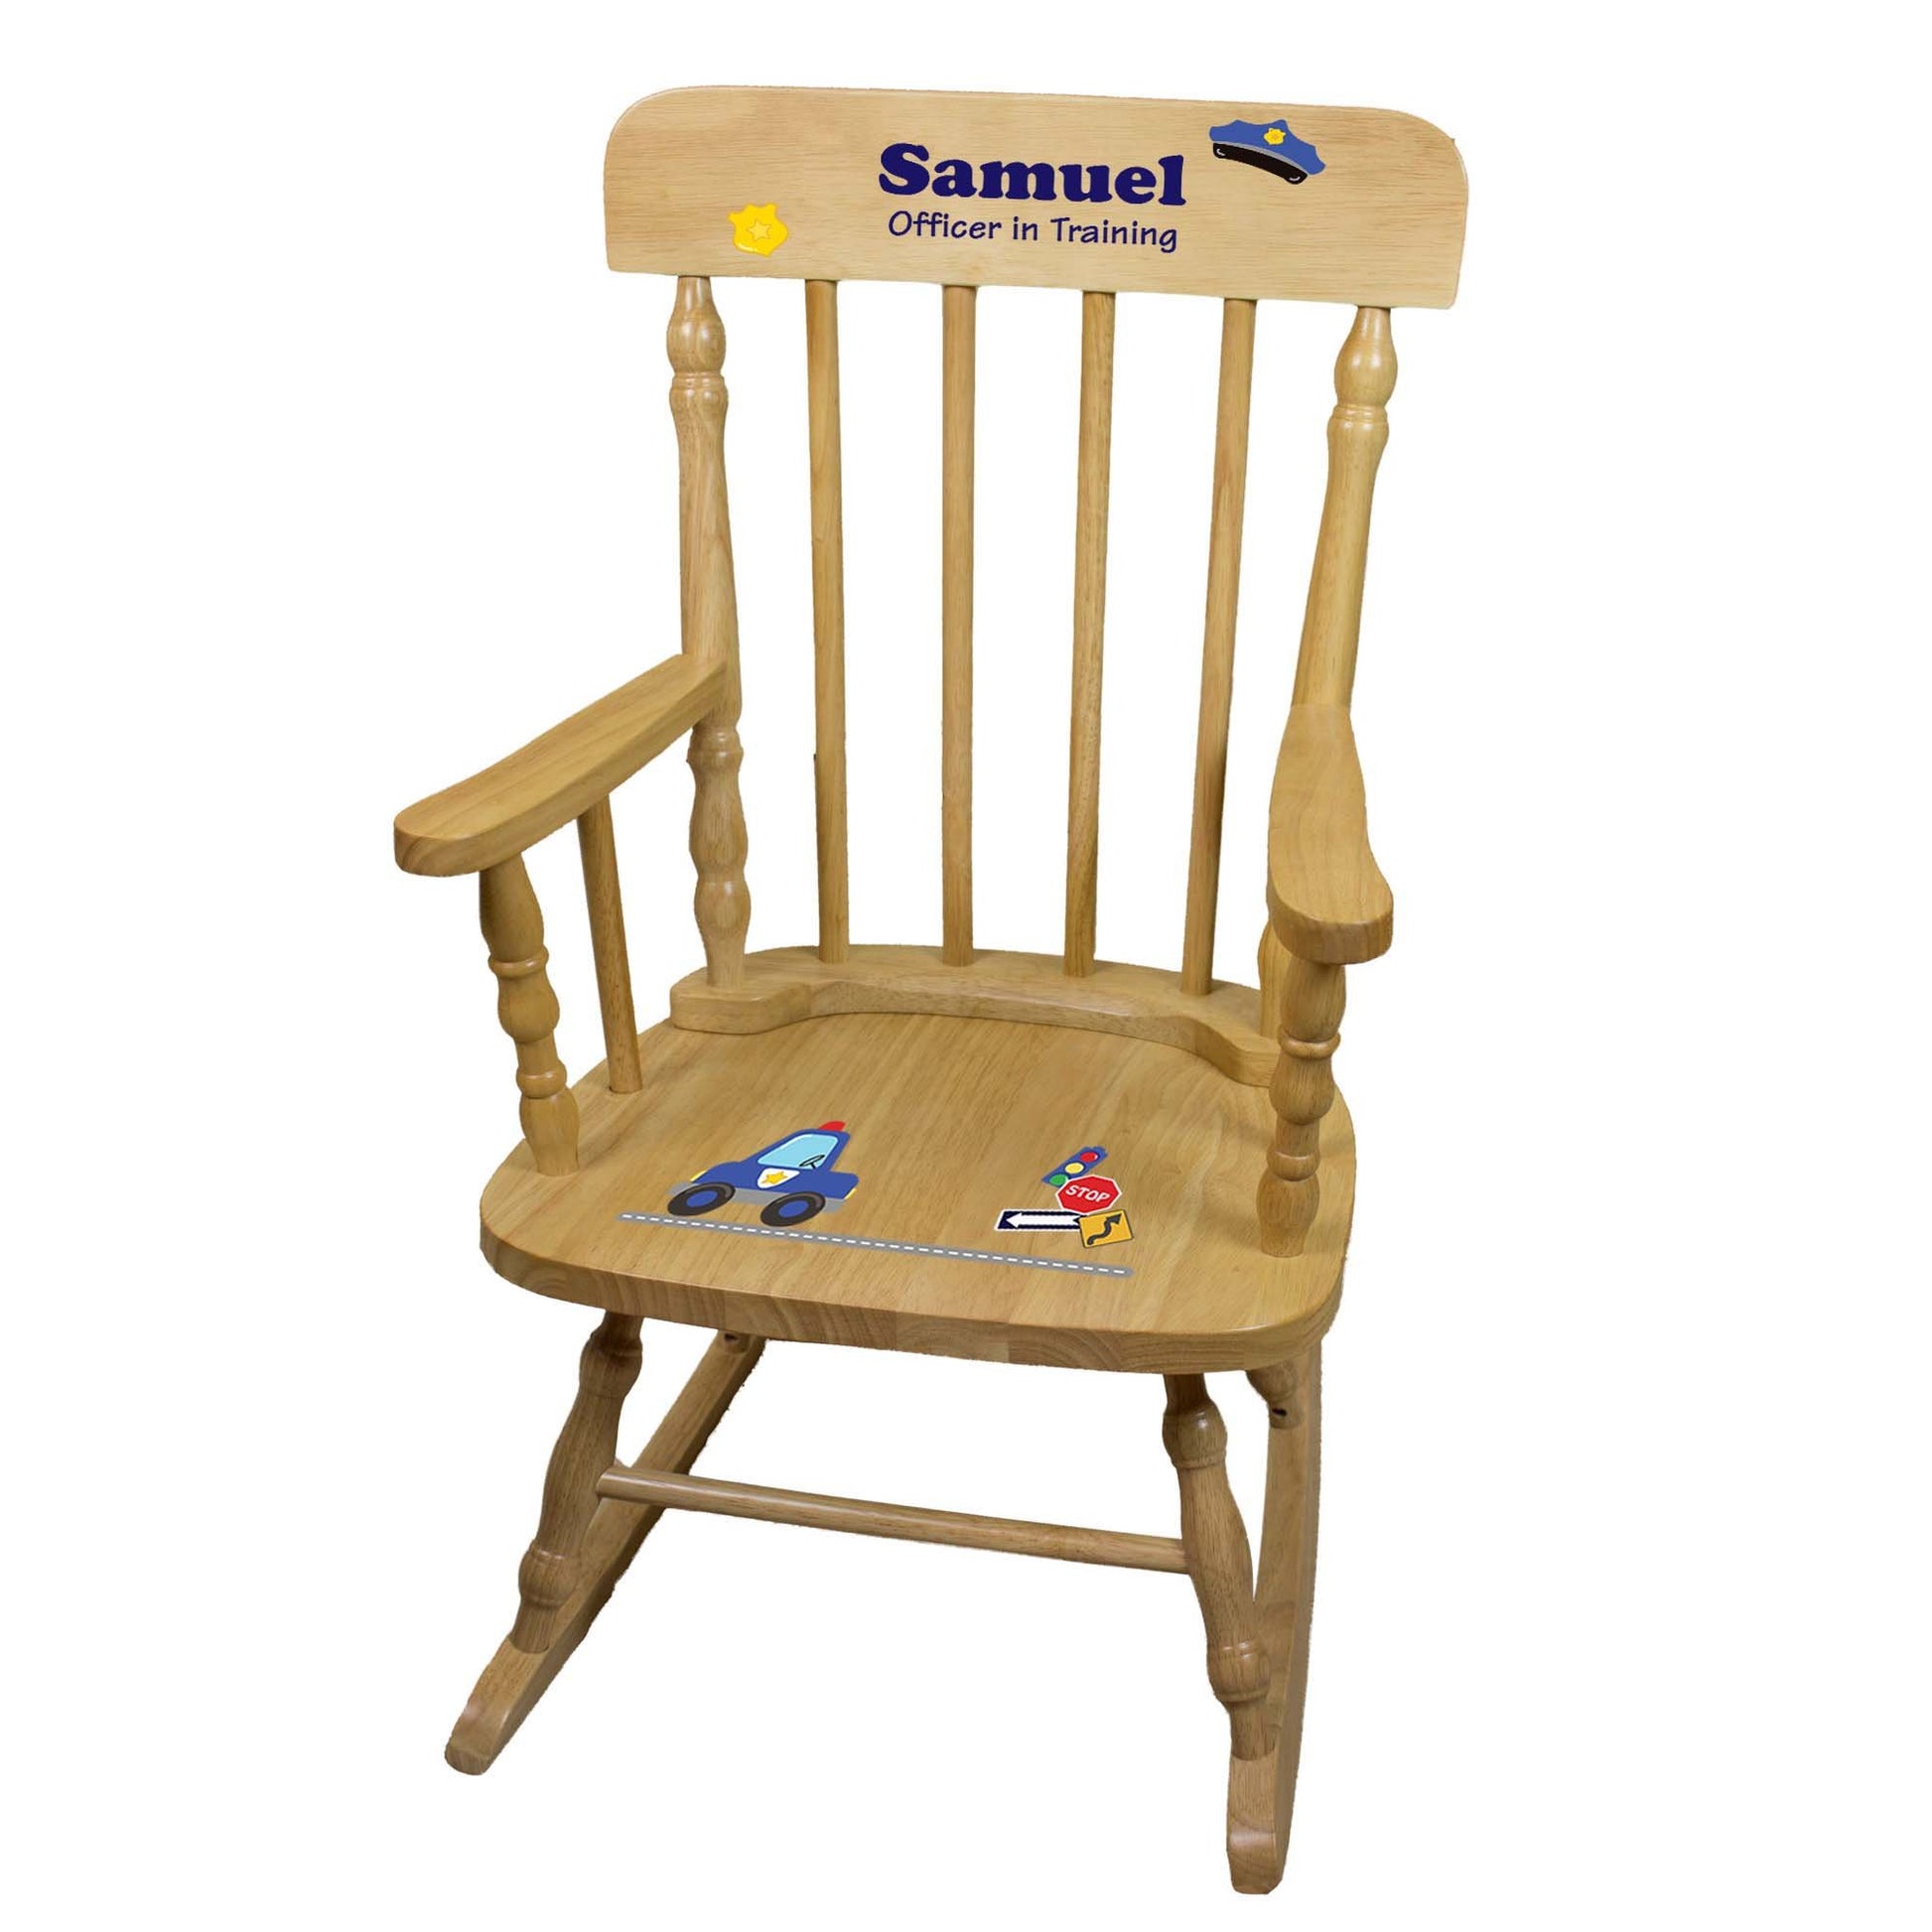 Construction Natural Spindle Rocking Chair